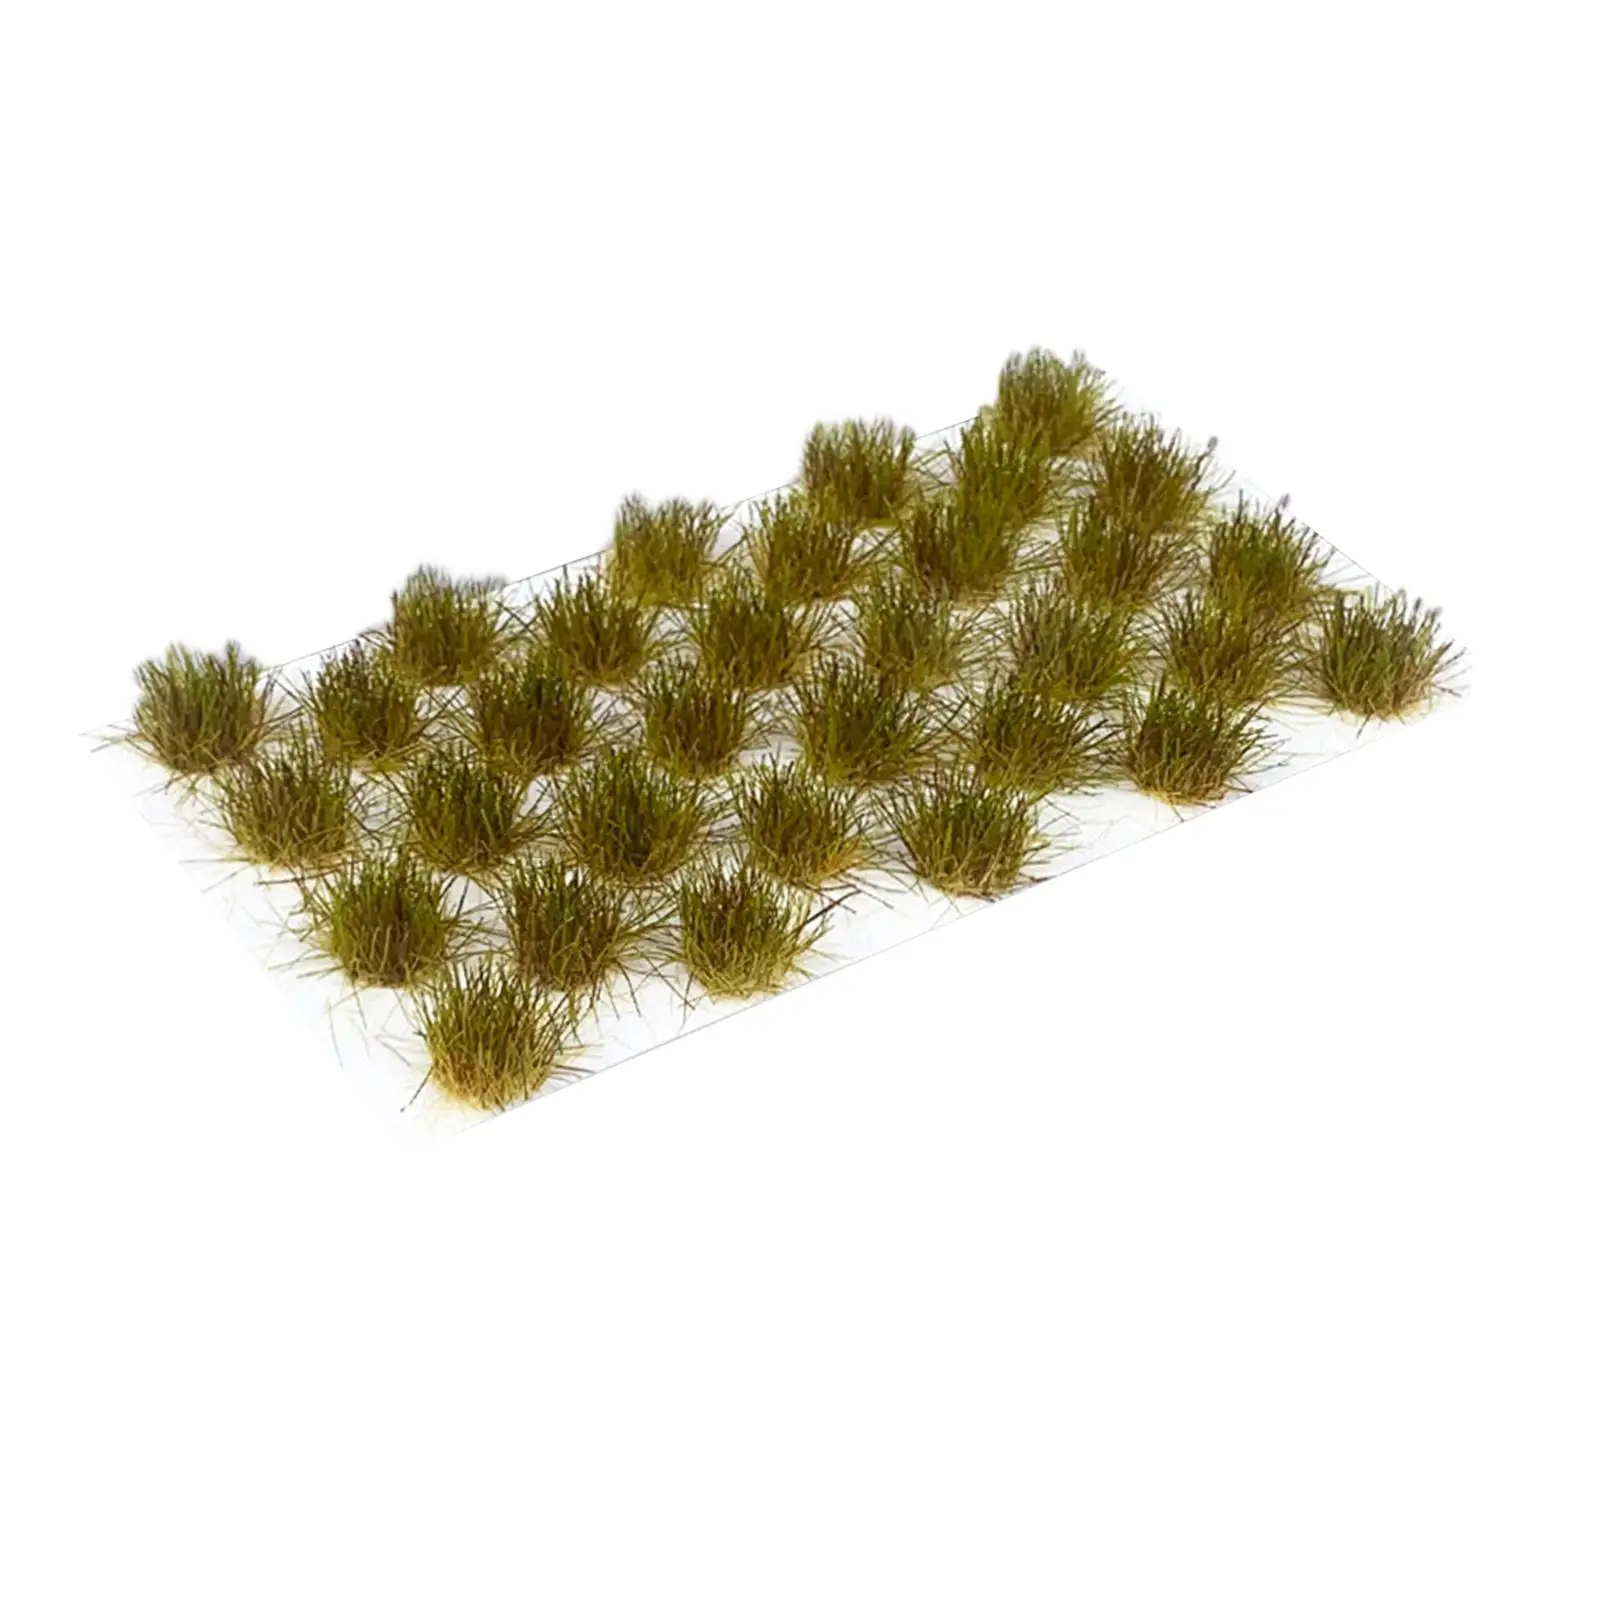 Self Adhesive Grass Tufts Grass groups Diorama Layout Scenery Miniature Artificial Grass for Desk Decor